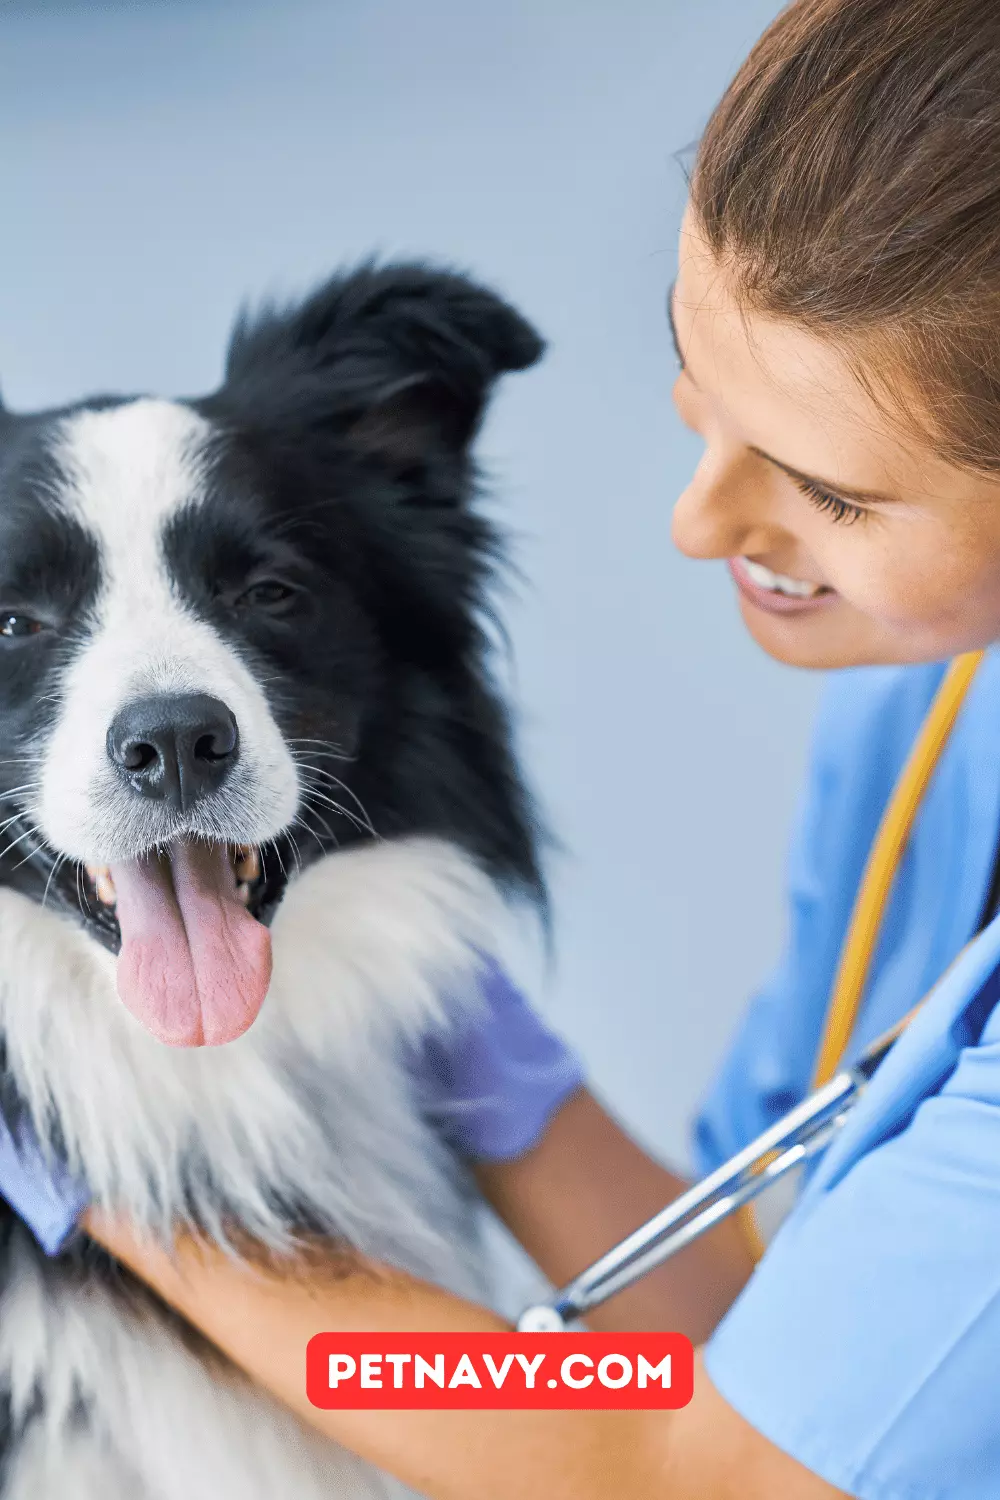 Dog Health What Is a Dog’s Normal Body Temperature